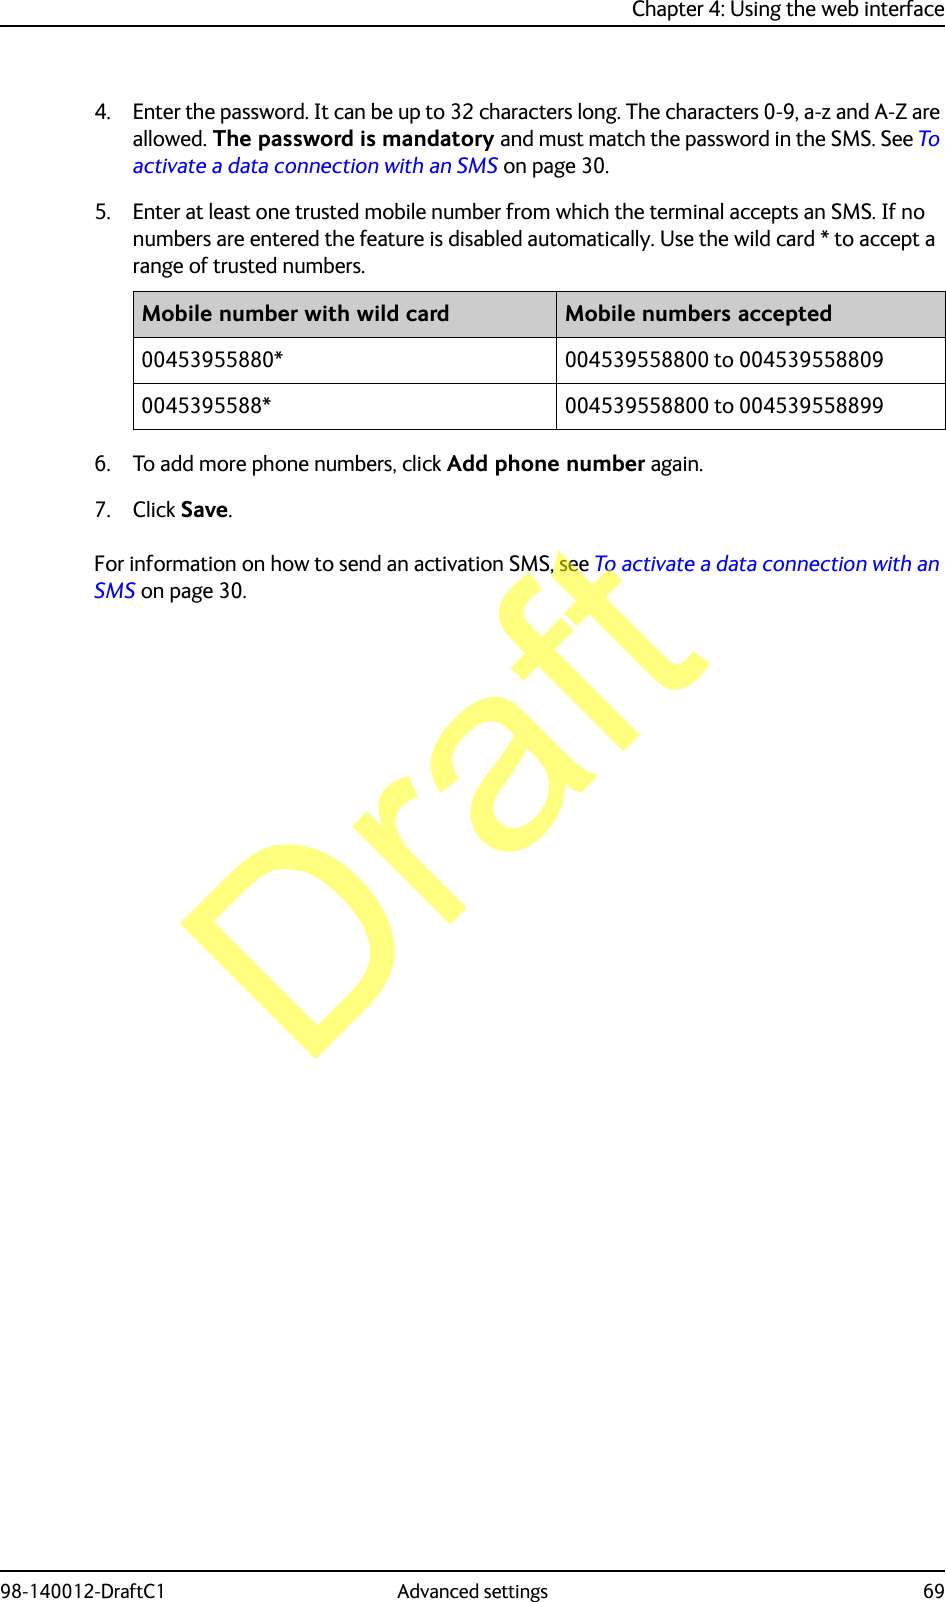 Chapter 4: Using the web interface98-140012-DraftC1 Advanced settings 694. Enter the password. It can be up to 32 characters long. The characters 0-9, a-z and A-Z are allowed. The password is mandatory and must match the password in the SMS. See To activate a data connection with an SMS on page 30.5. Enter at least one trusted mobile number from which the terminal accepts an SMS. If no numbers are entered the feature is disabled automatically. Use the wild card * to accept a range of trusted numbers.6. To add more phone numbers, click Add phone number again.7. Click Save.For information on how to send an activation SMS, see To activate a data connection with an SMS on page 30.Mobile number with wild card Mobile numbers accepted00453955880* 004539558800 to 0045395588090045395588* 004539558800 to 004539558899Draft